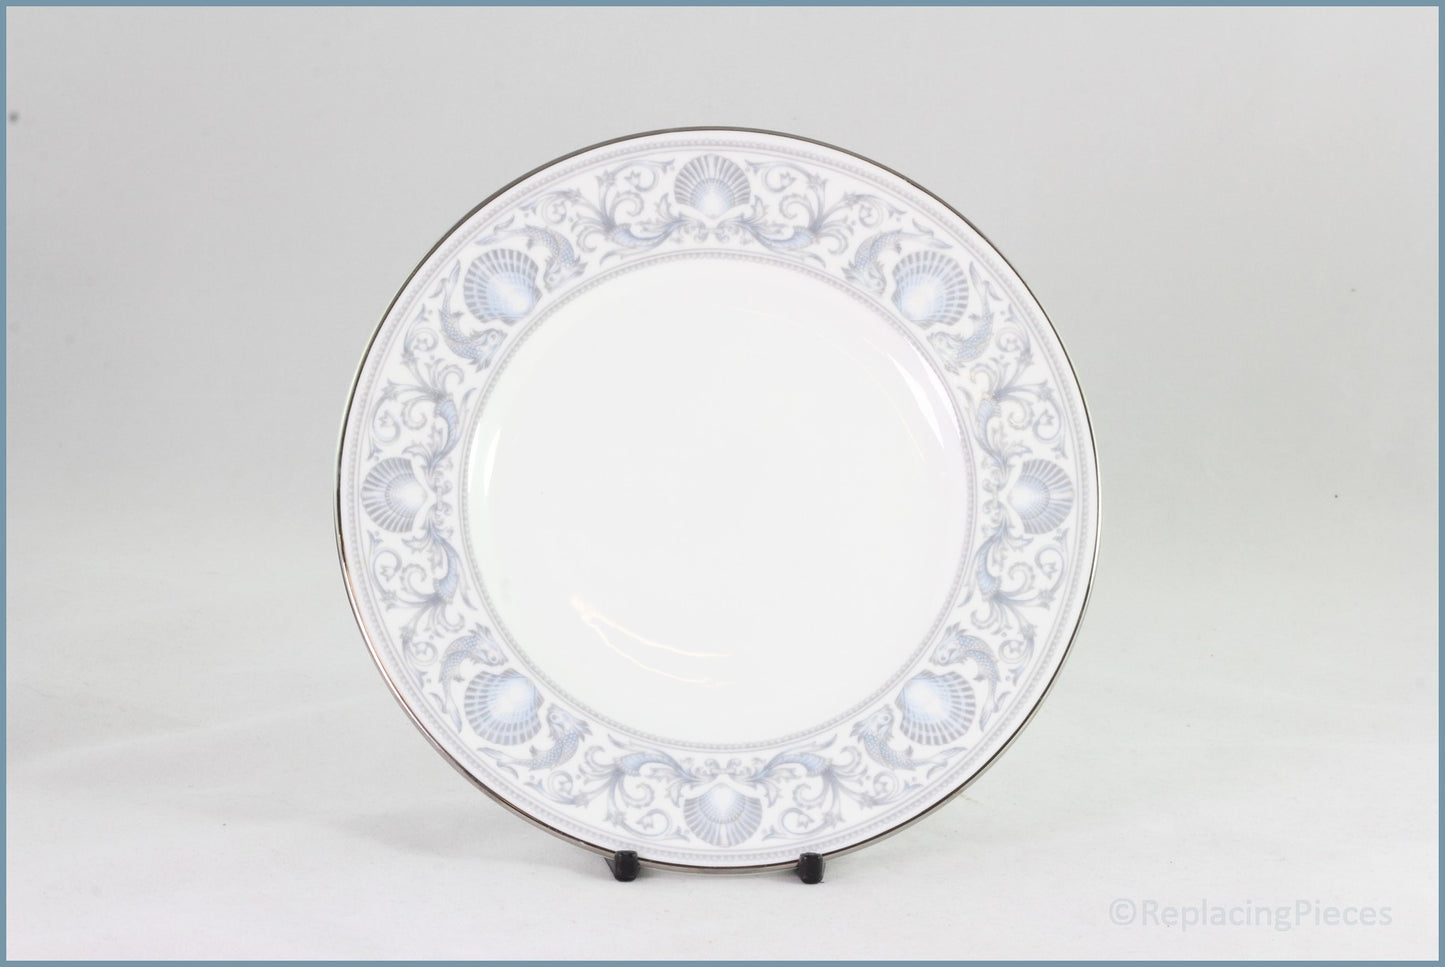 Wedgwood - Dolphins - 7" Side Plate